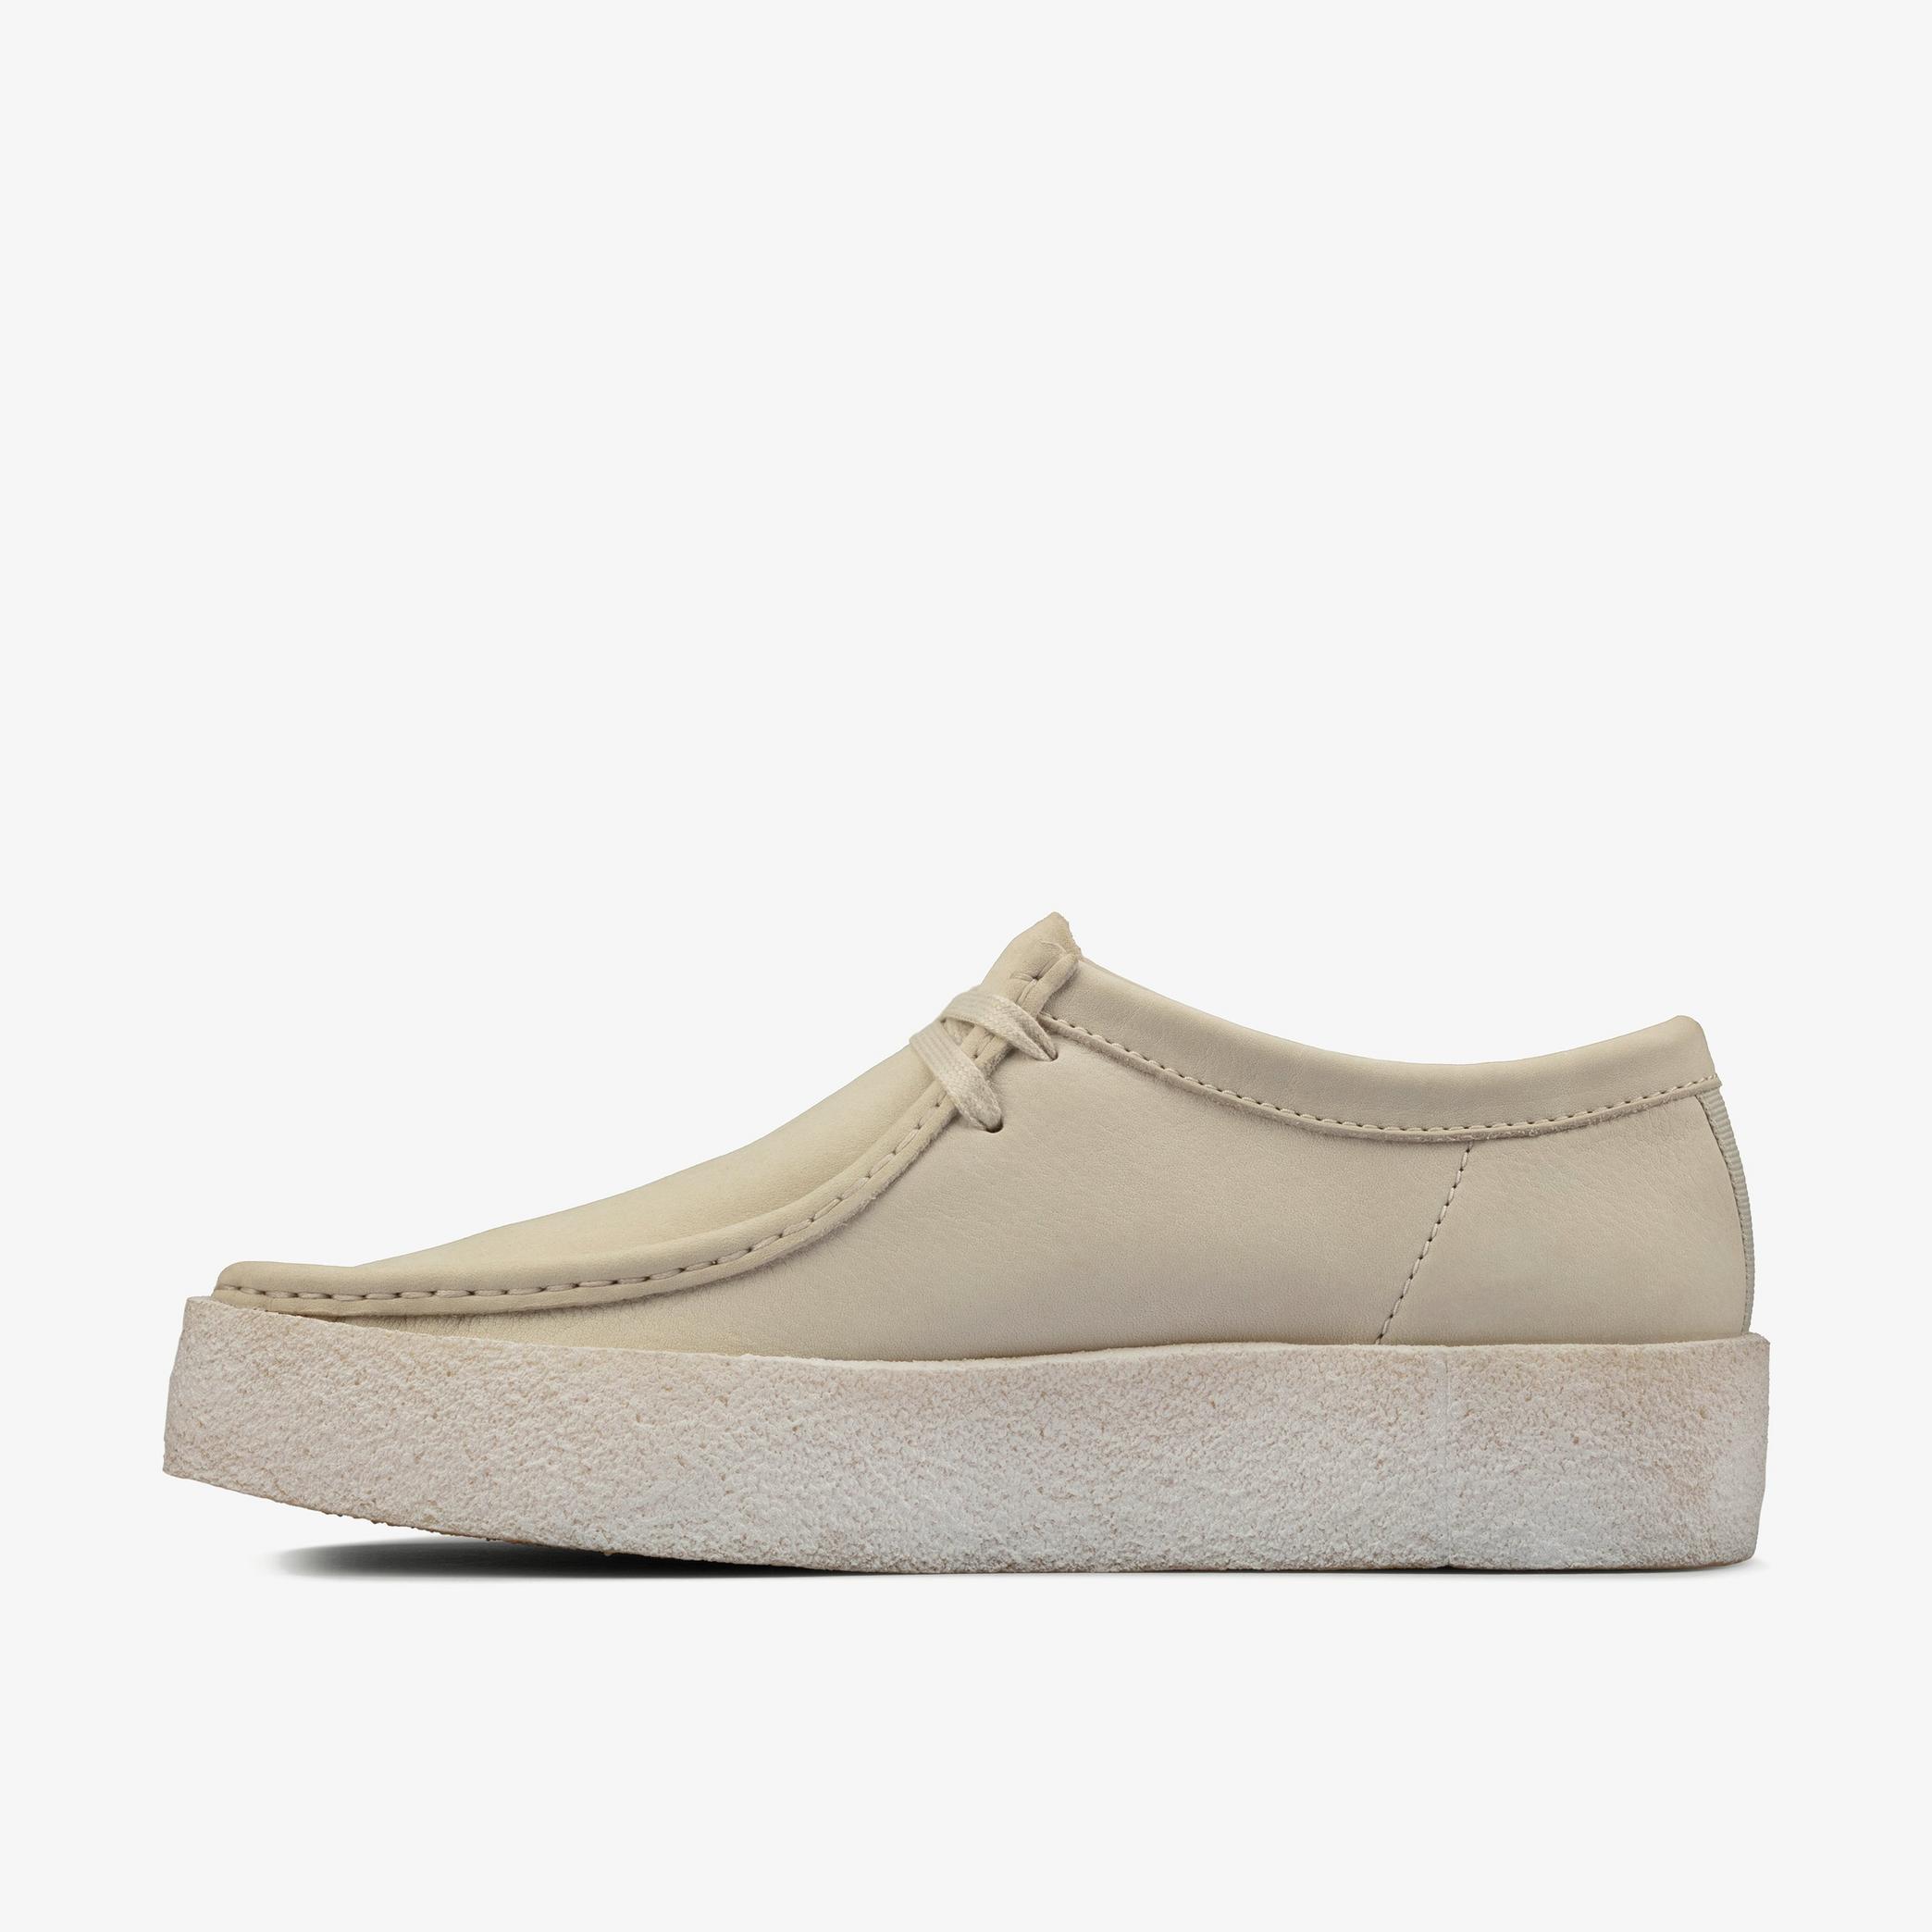 Wallabee Cup White Nubuck Wallabee, view 2 of 7